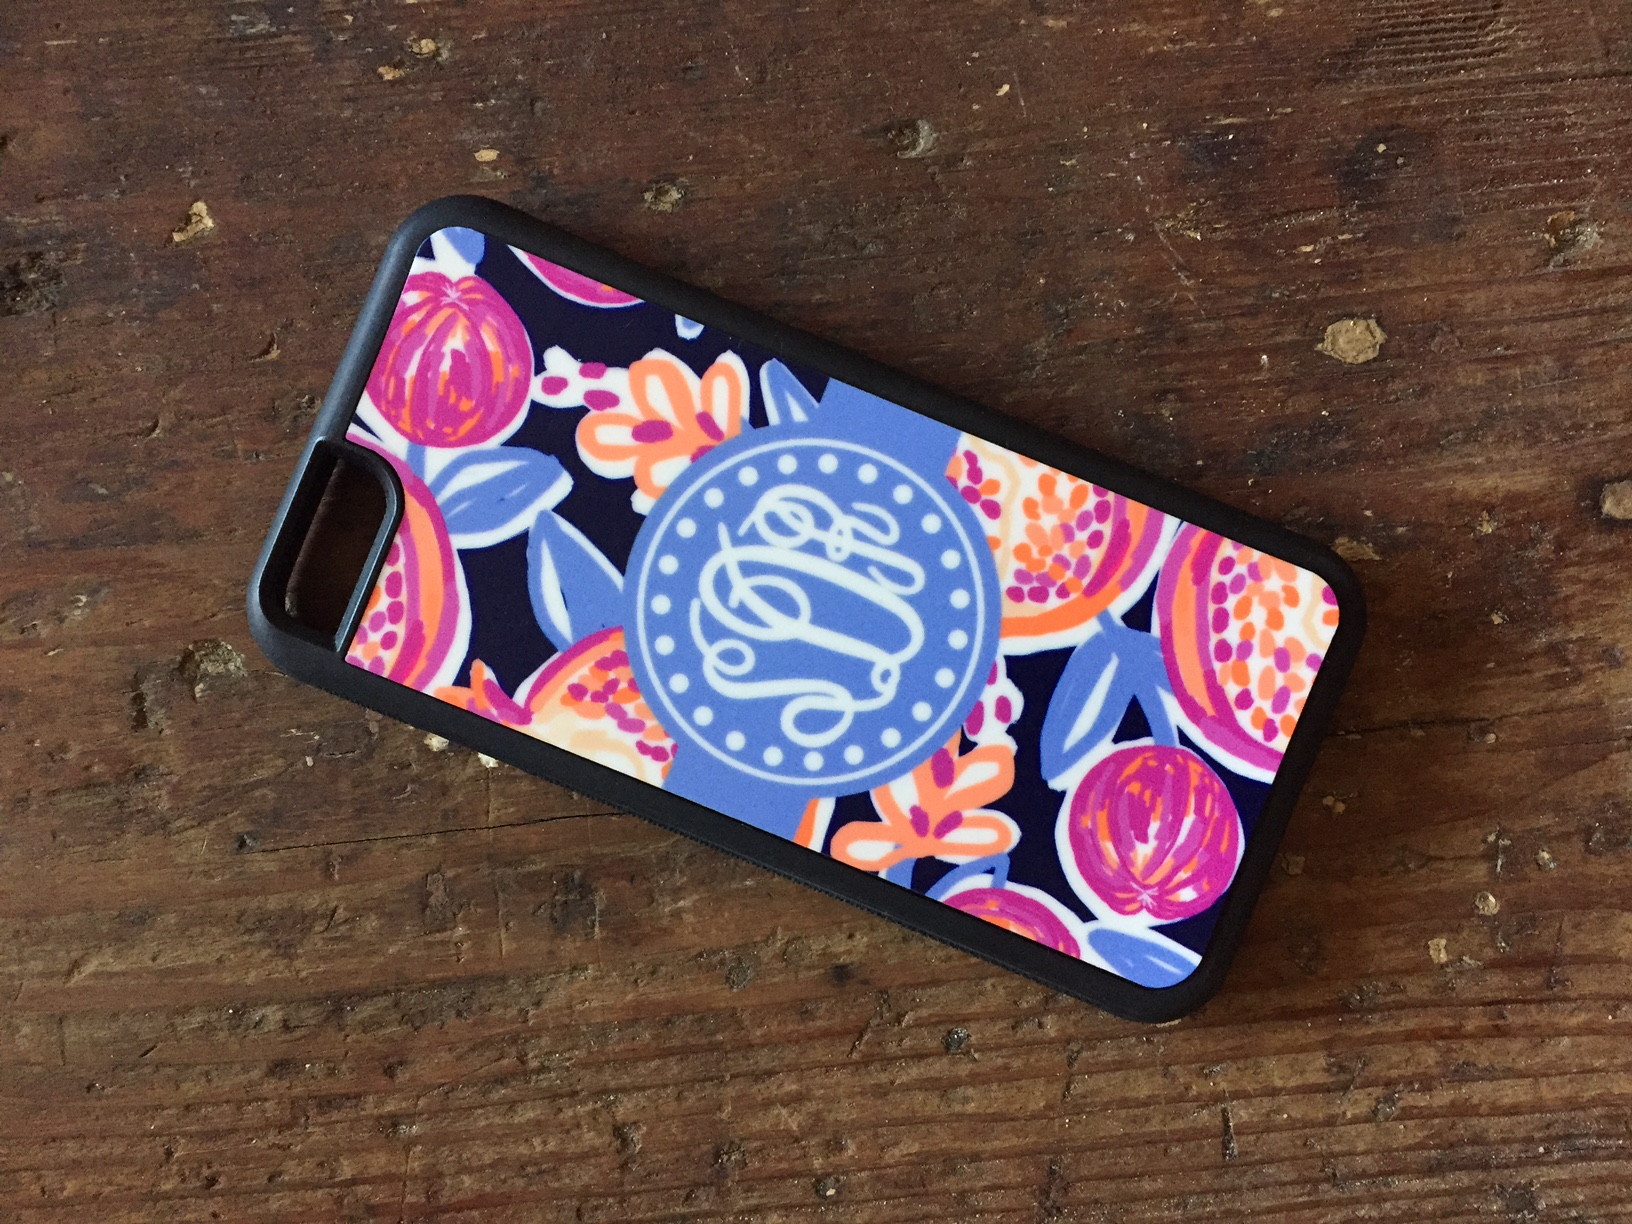 Monogram Cell Phone Case made with sublimation printing